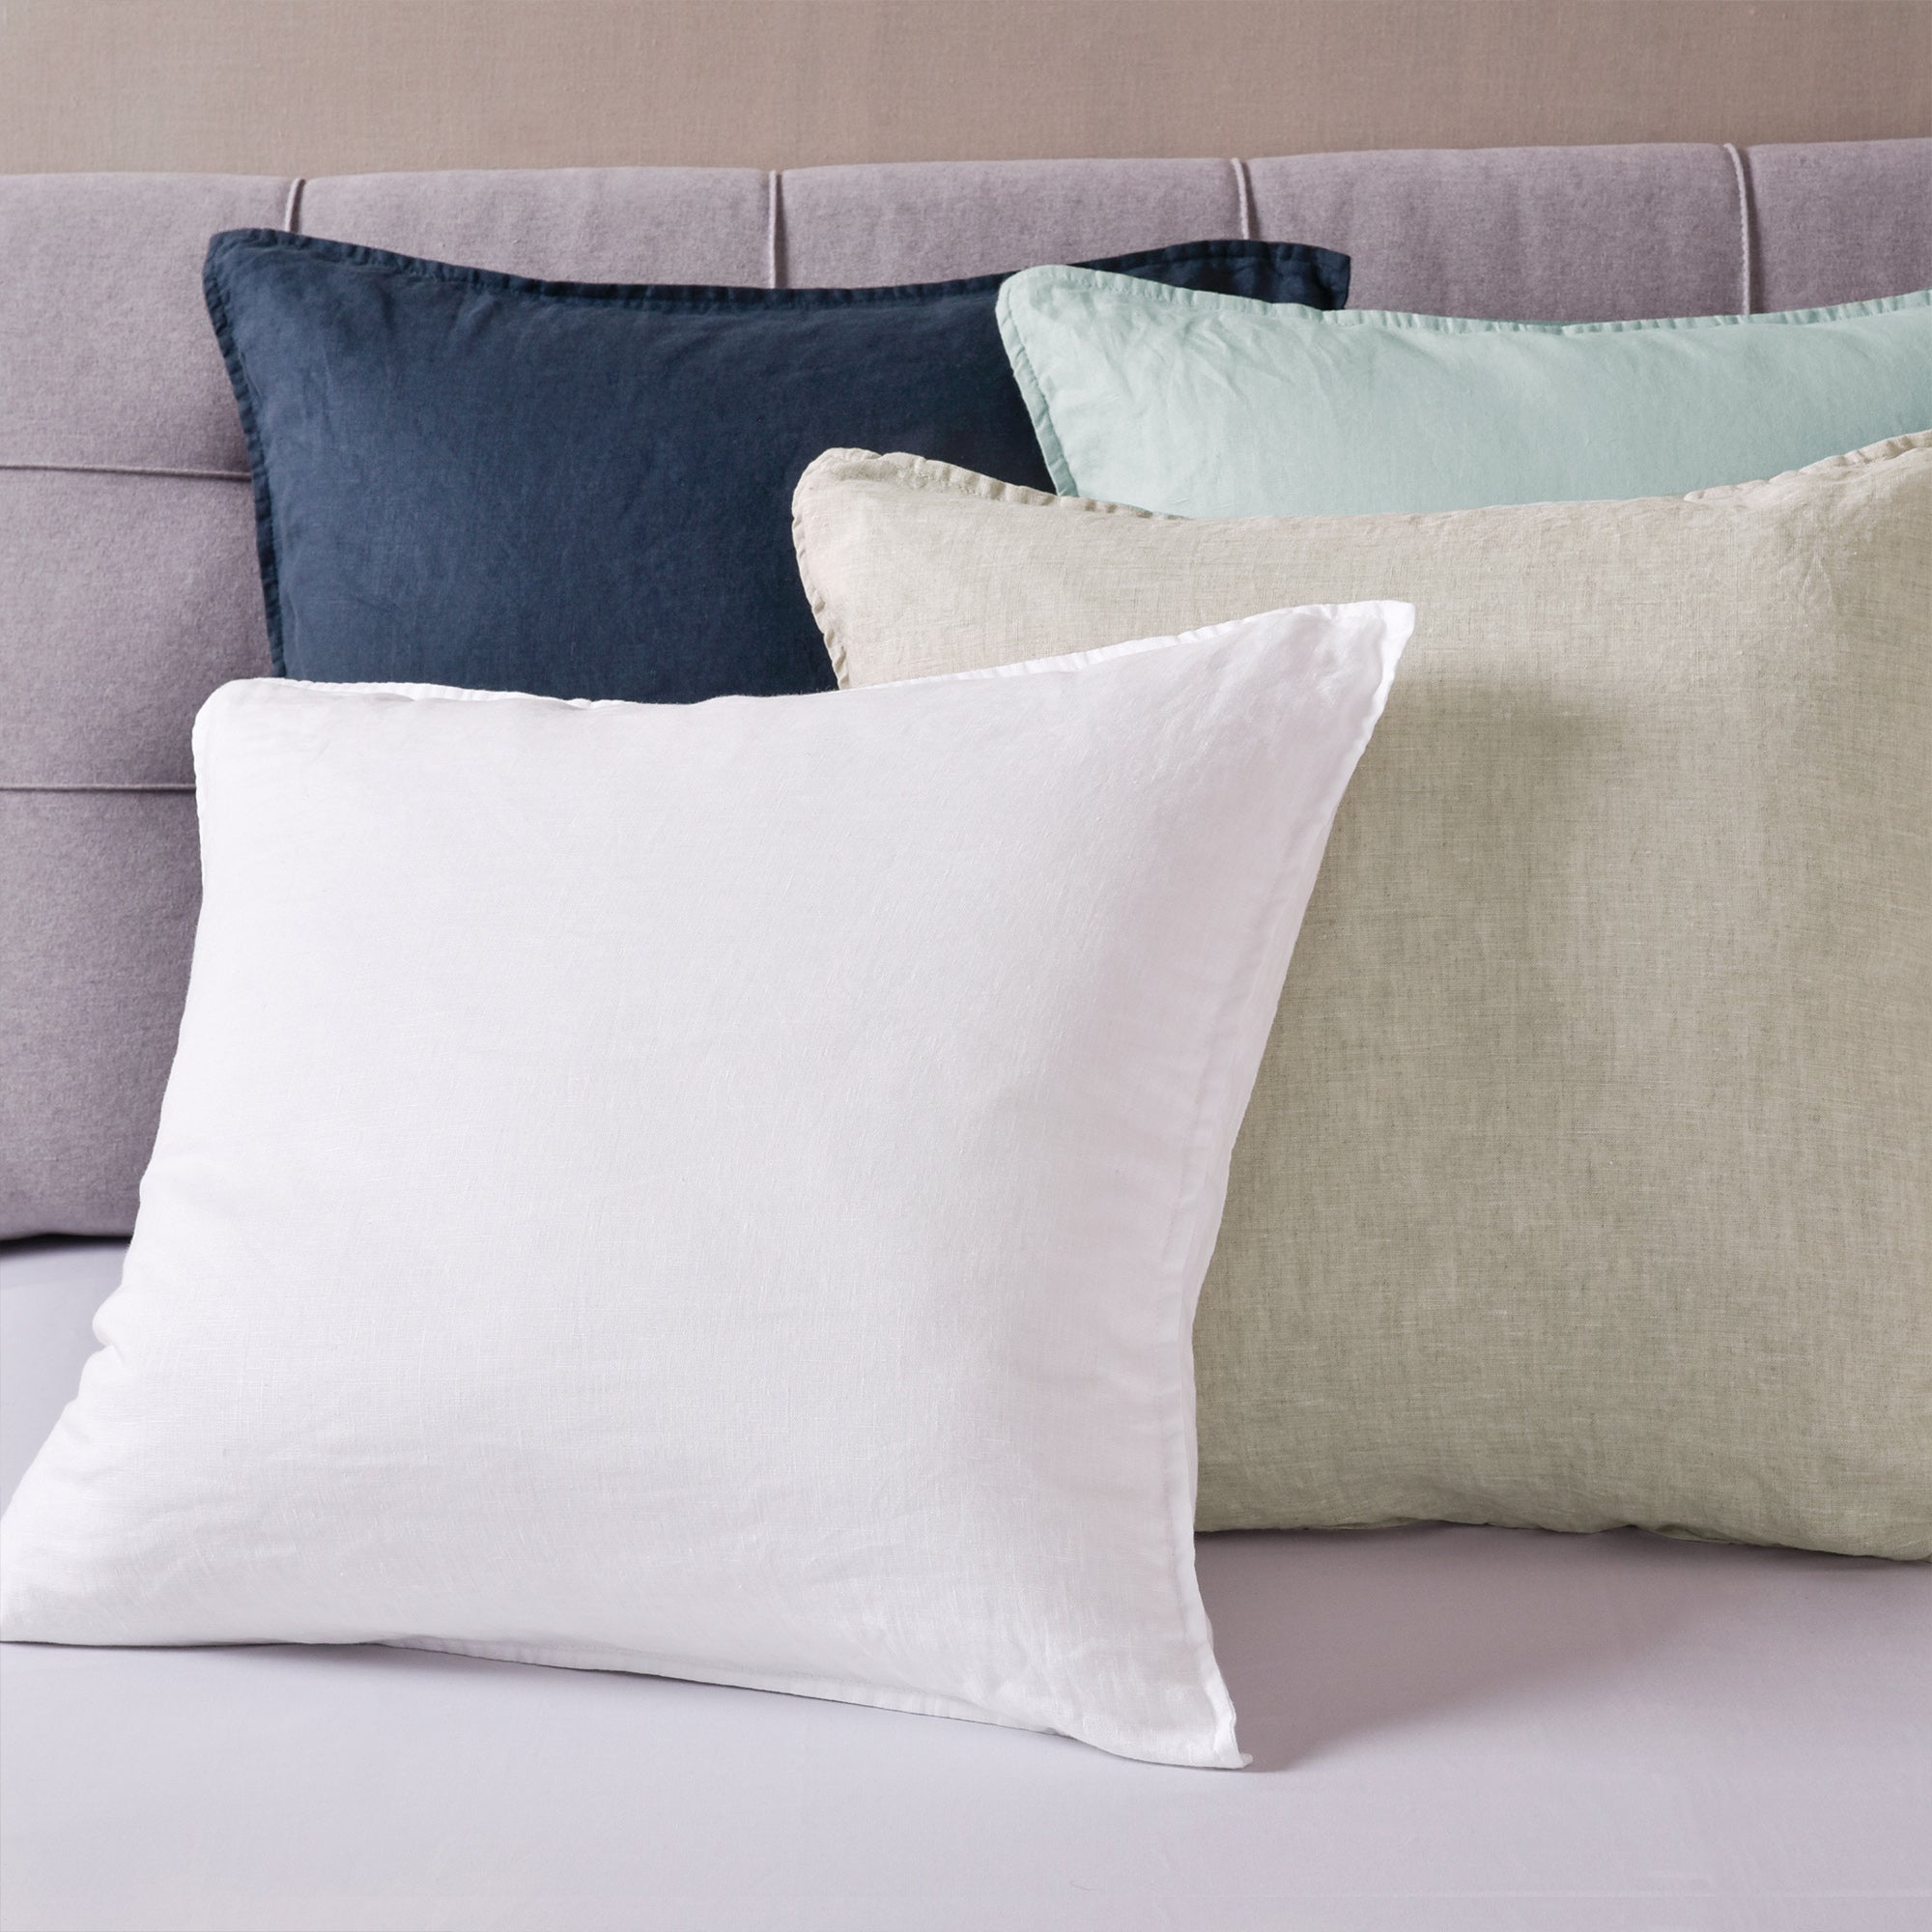 Washed Linen Square Pillow Cover- Set of 2